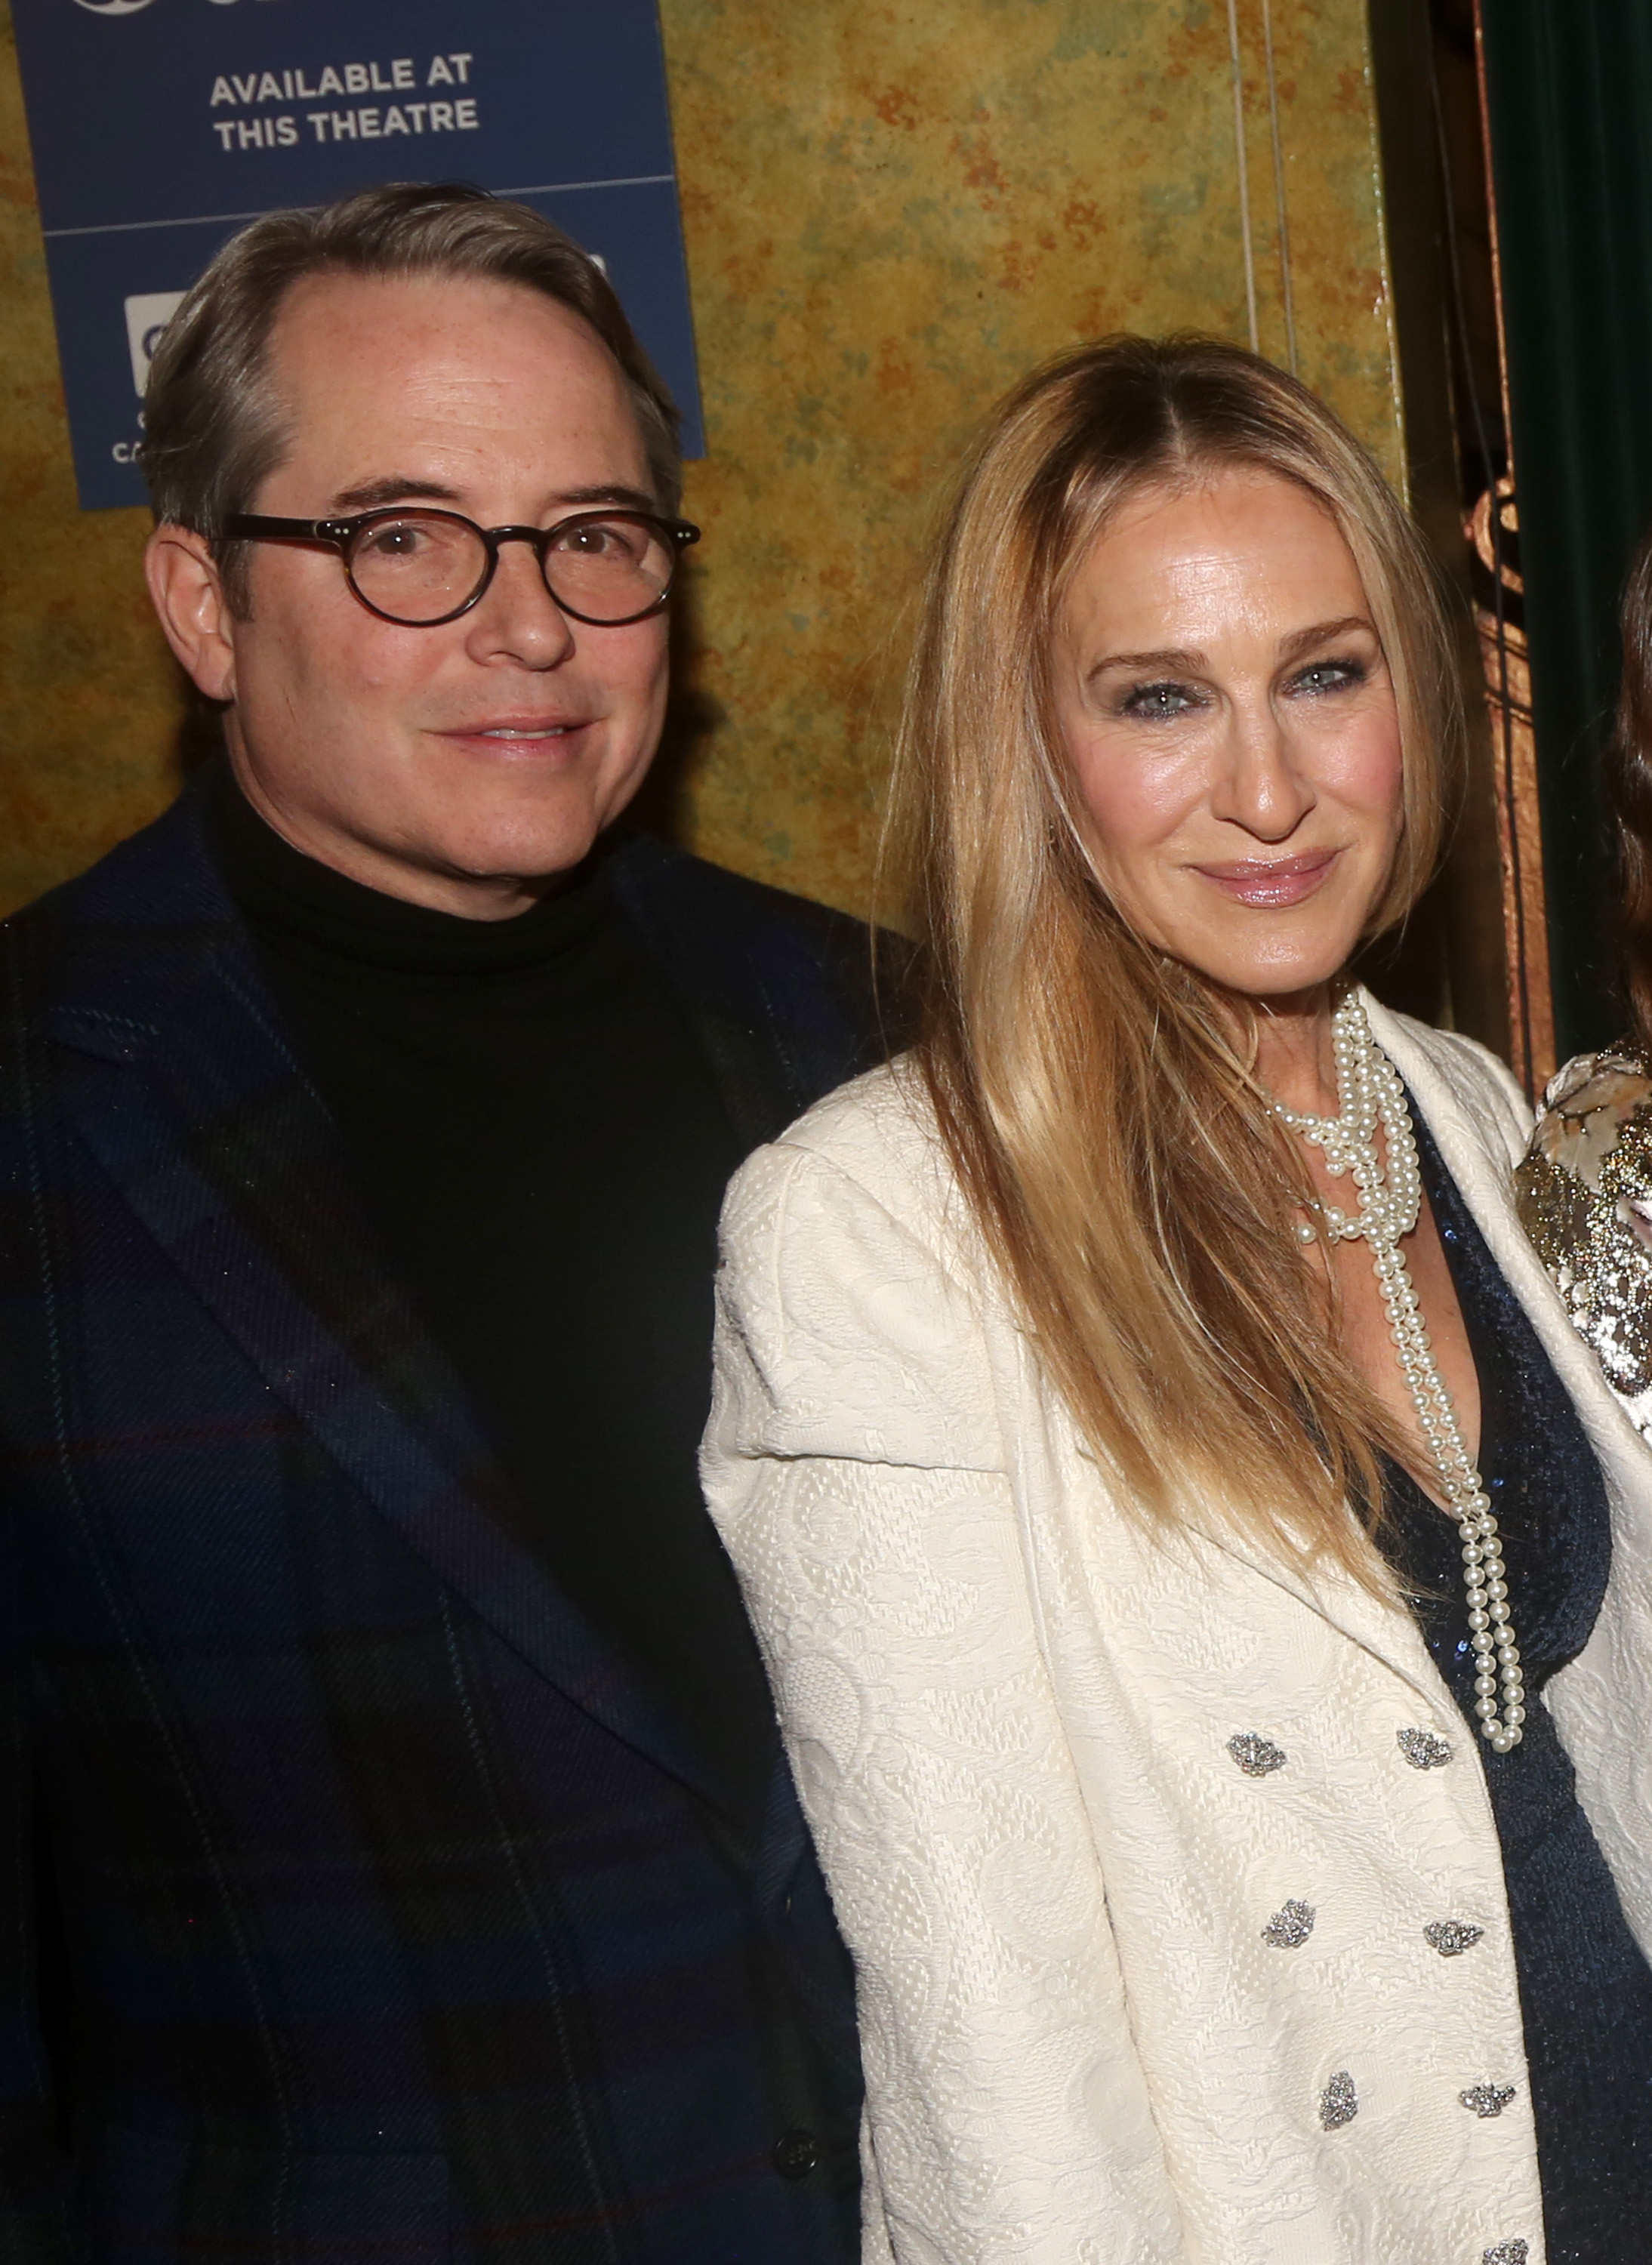 Matthew Broderick and Sarah Jessica Parker at the opening night of "Some Like It Hot!" on Broadway on December 11, 2022, in New York City | Source: Getty Images